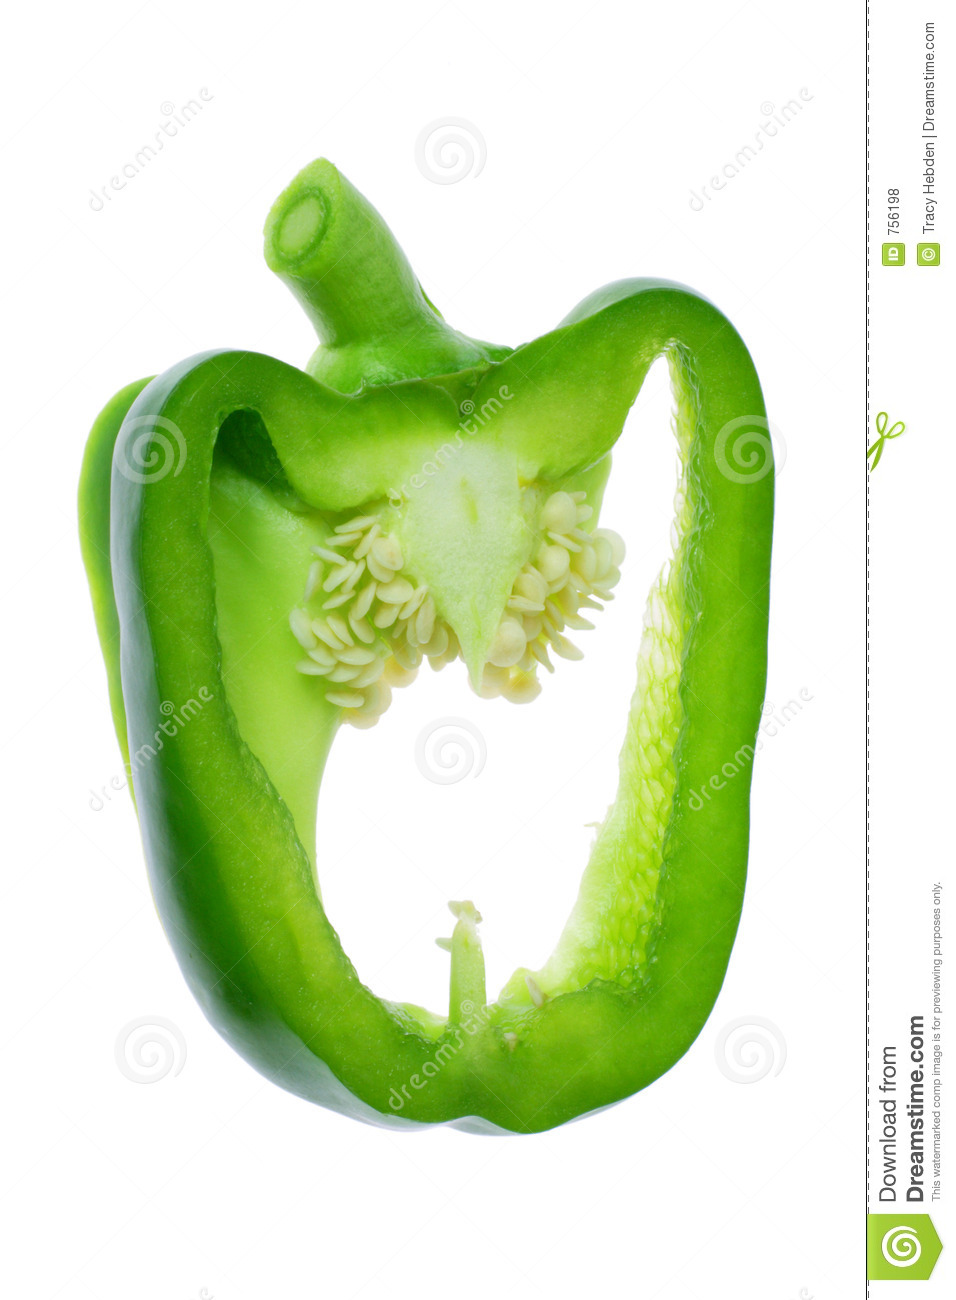 Green Pepper Royalty Free Stock Photos   Image  756198